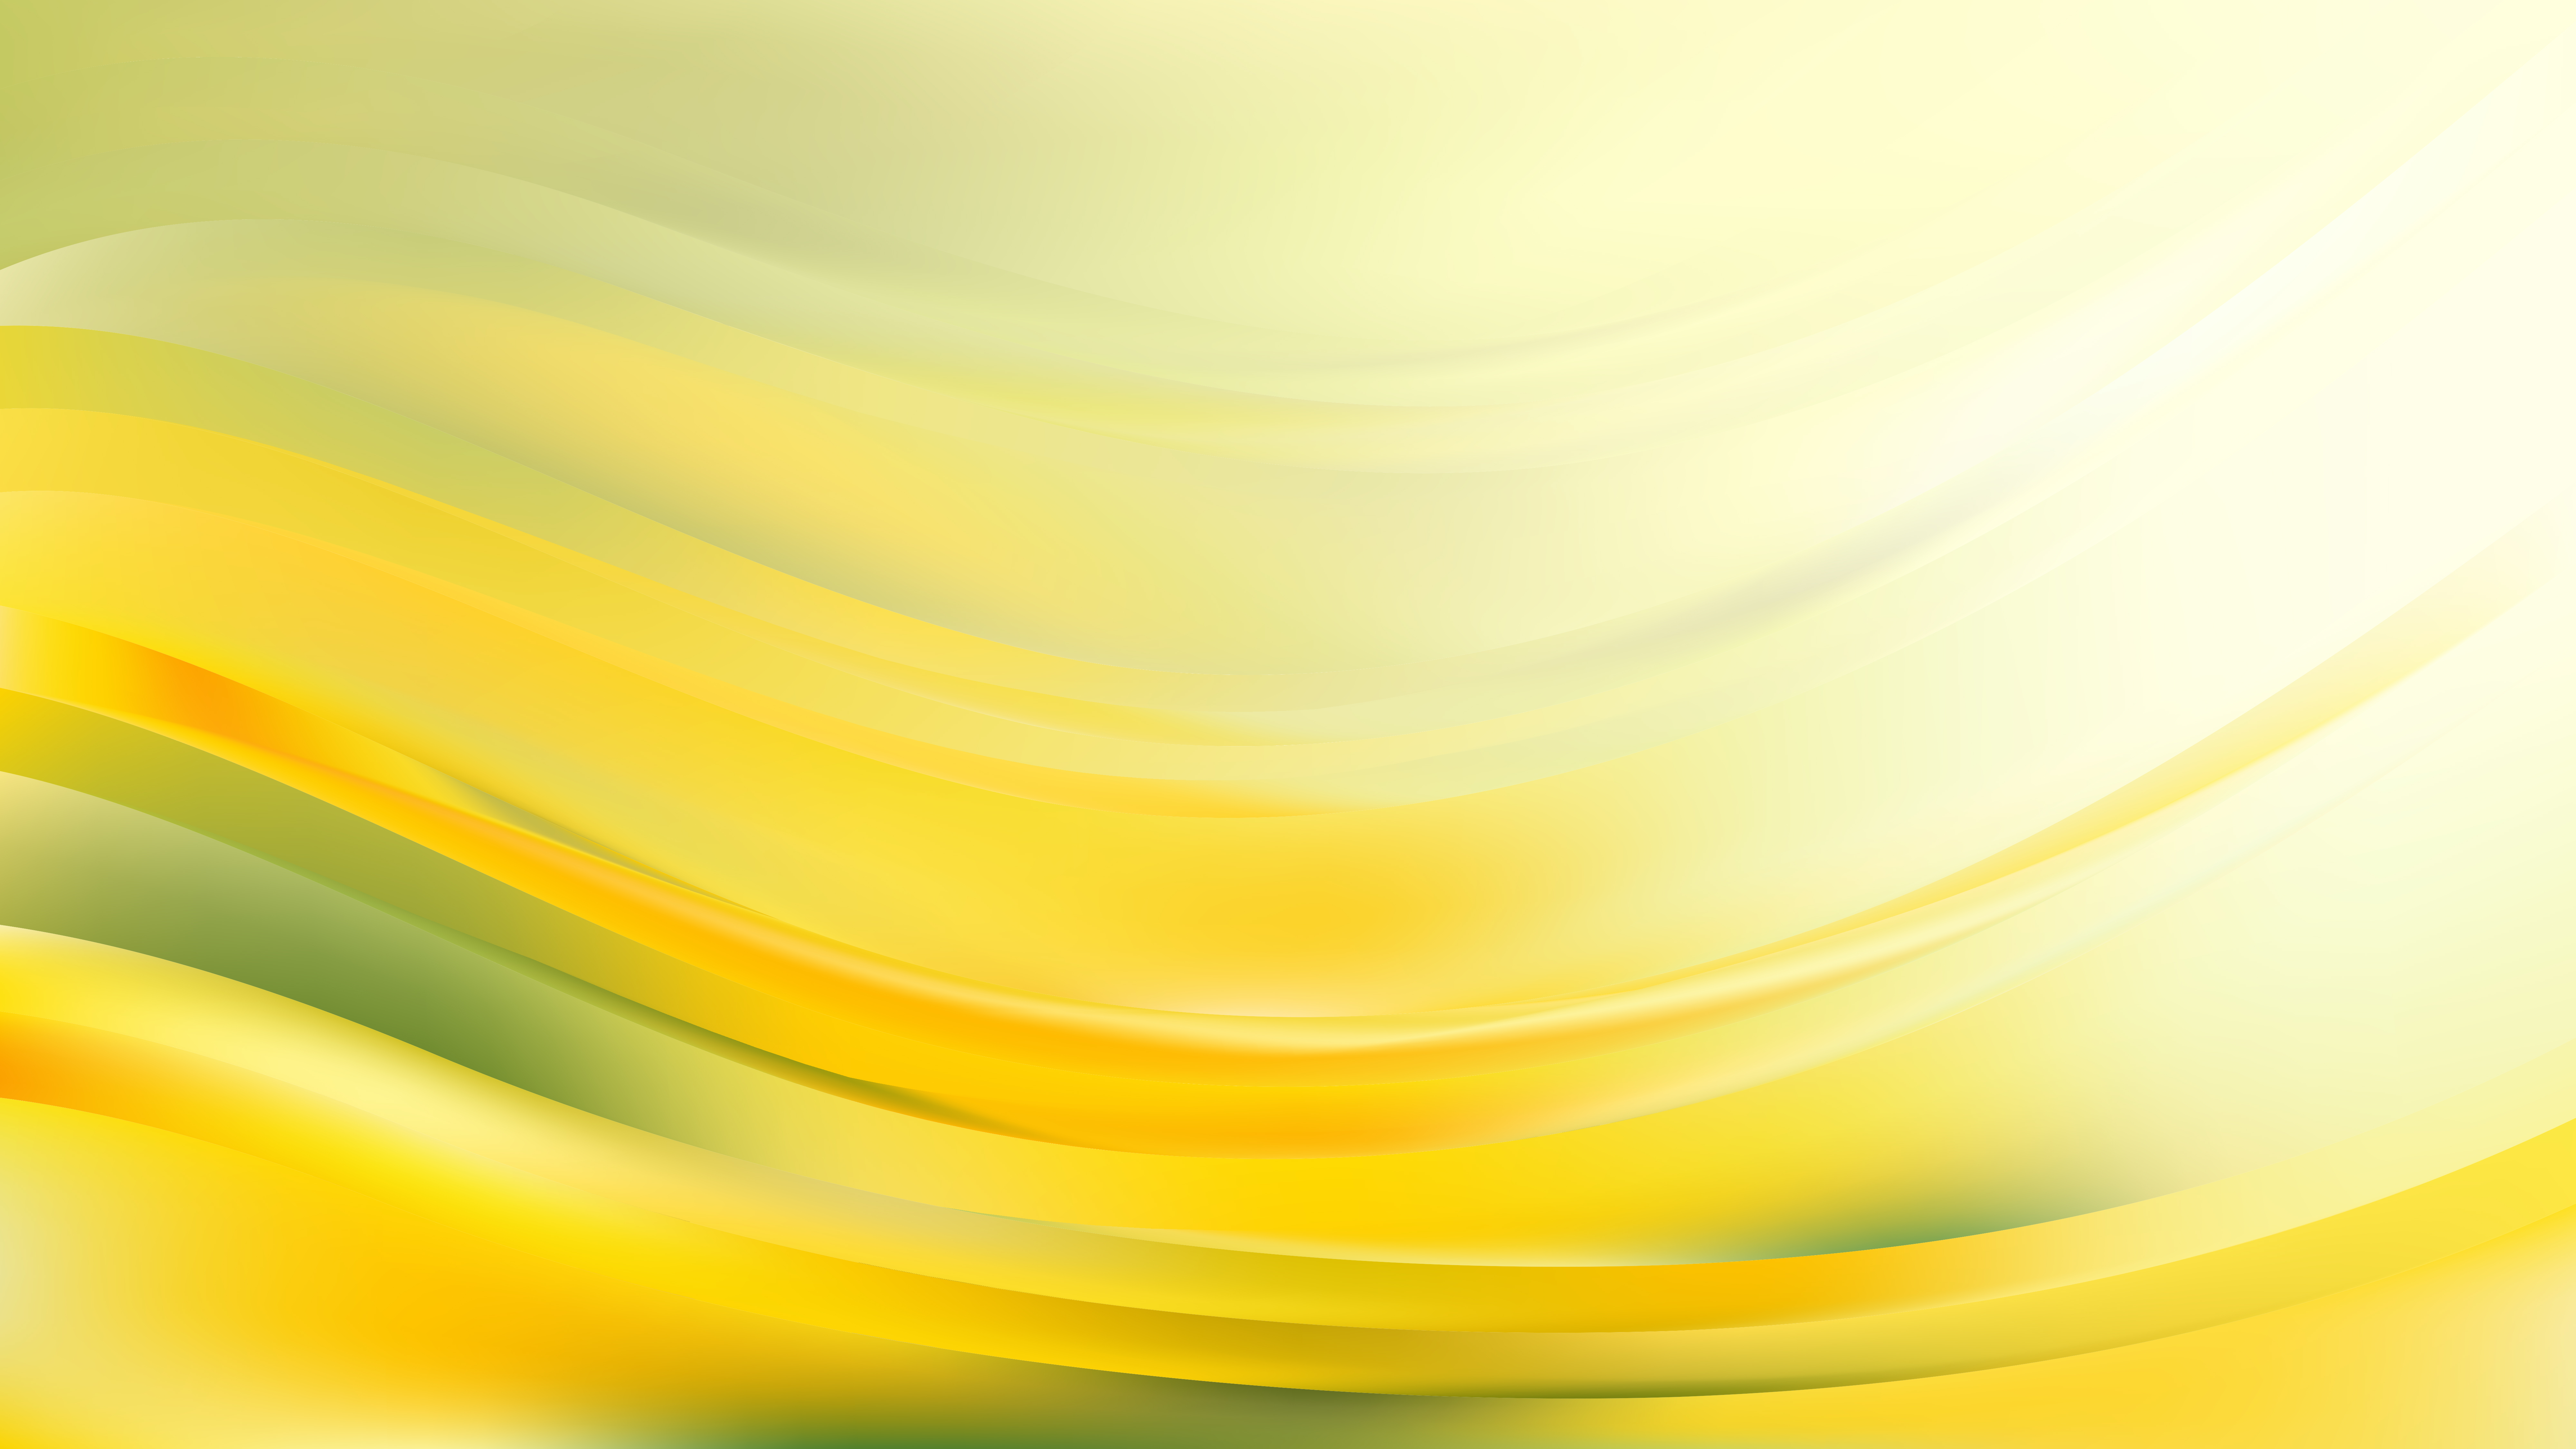 Free Light Yellow Curve Background